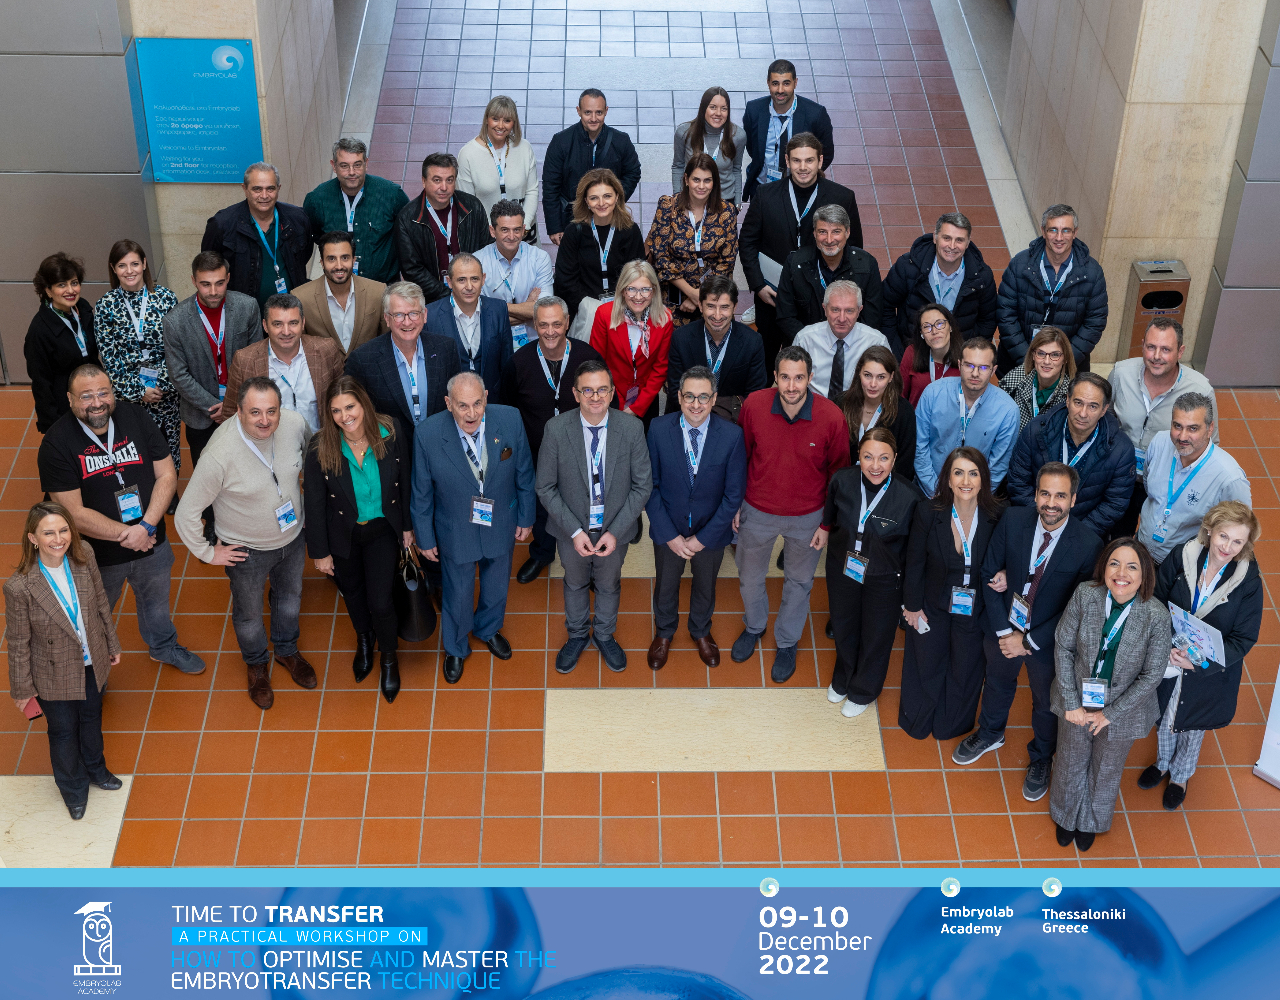 group photo-TIME TO TRANSFER_ A PRACTICAL WORKSHOP ON OPTIMISATION AND MASTERING OF EMBRYOTRANSFER